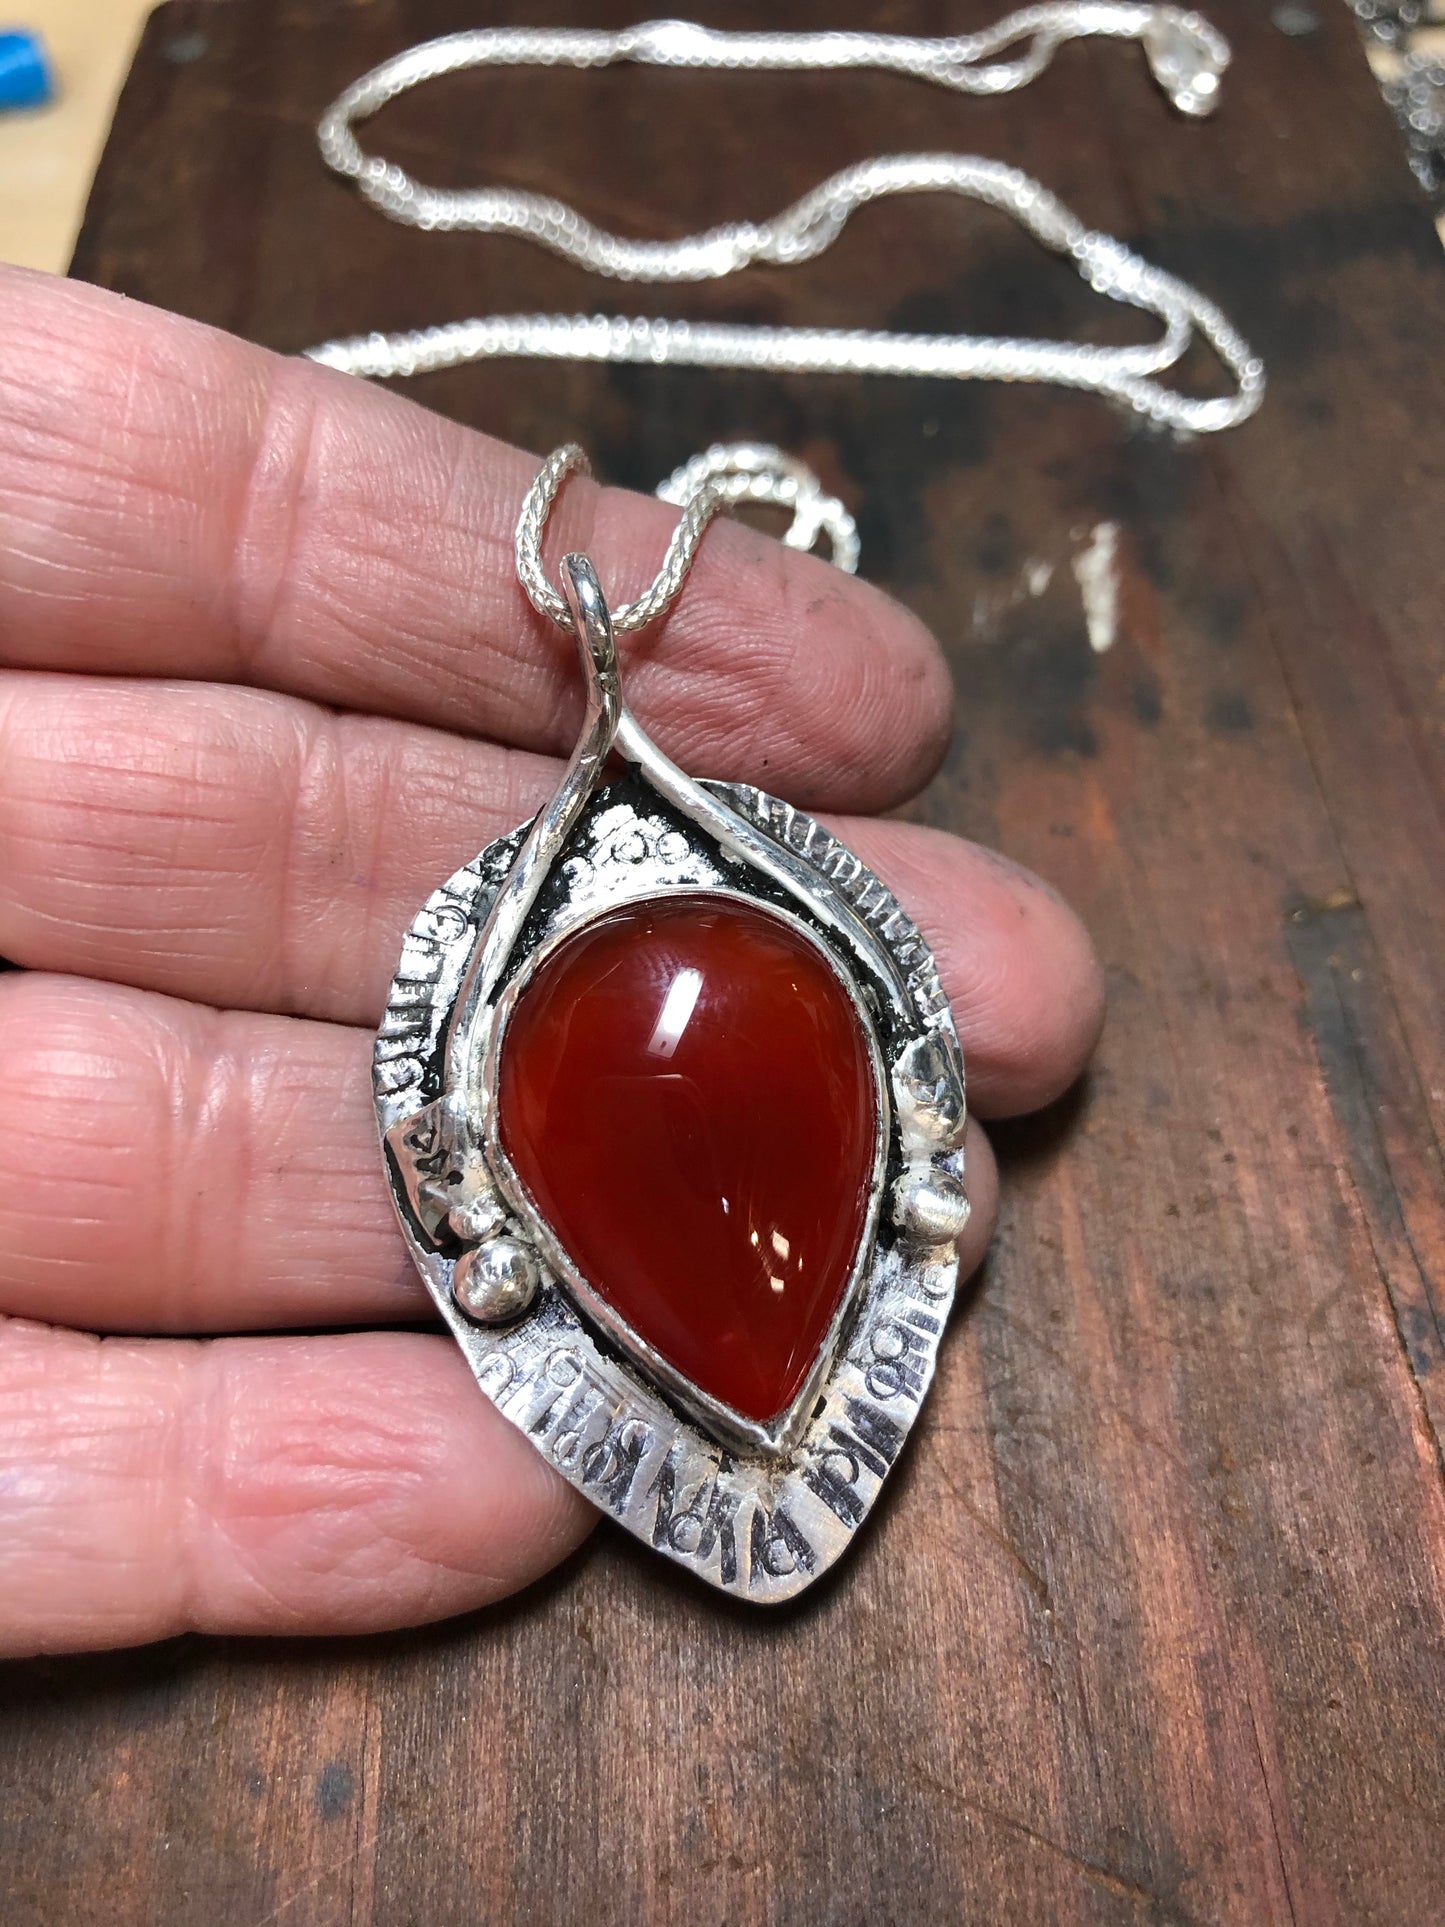 Carnelian gemstone necklace - collectionsbytracy.com